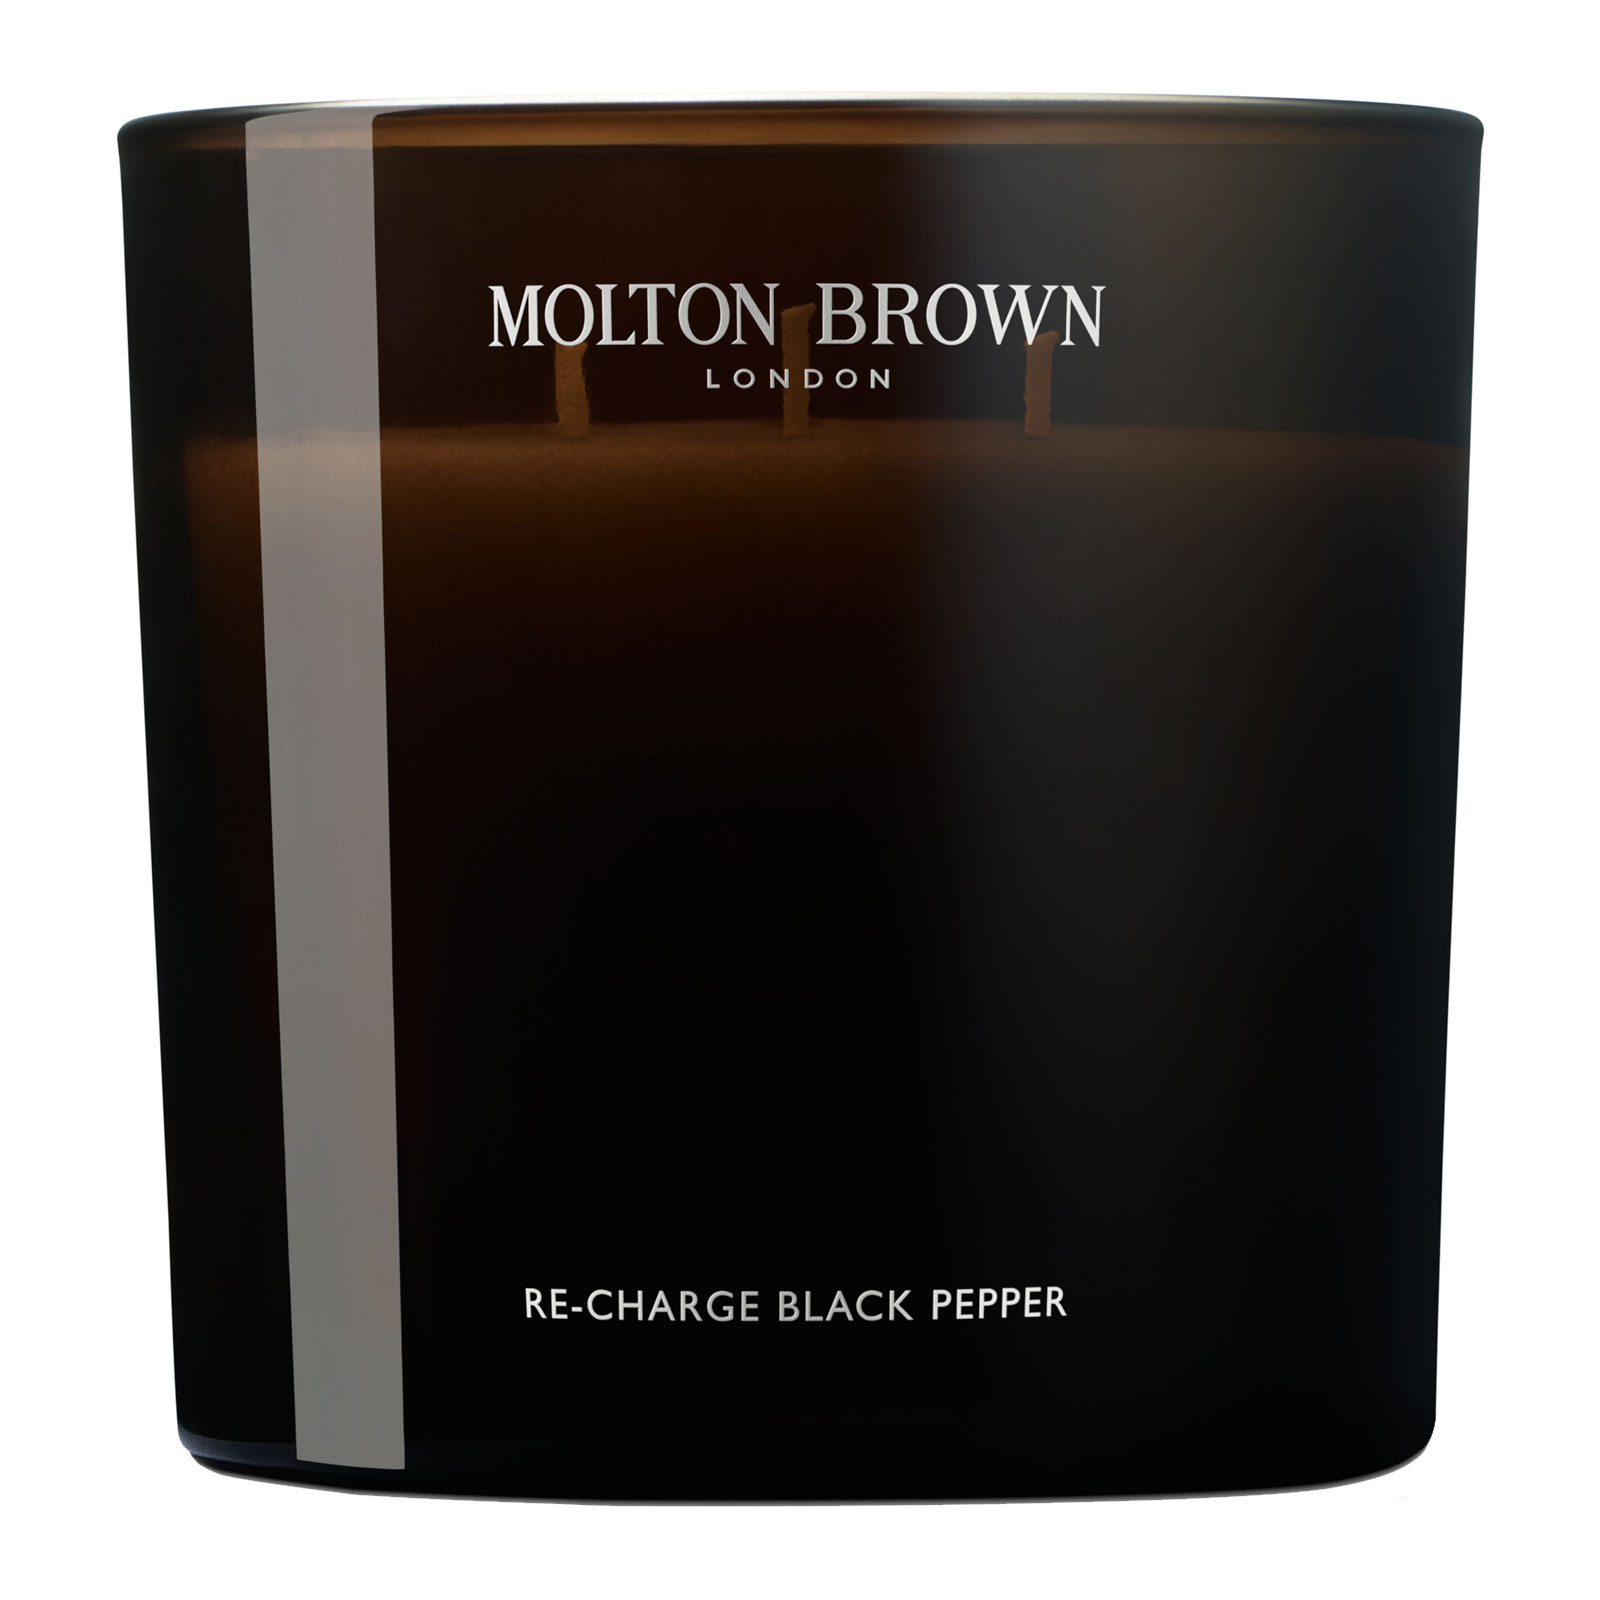 Molton Brown Re-Charge Black Pepper Luxury Scented Triple Wick Candle 600G